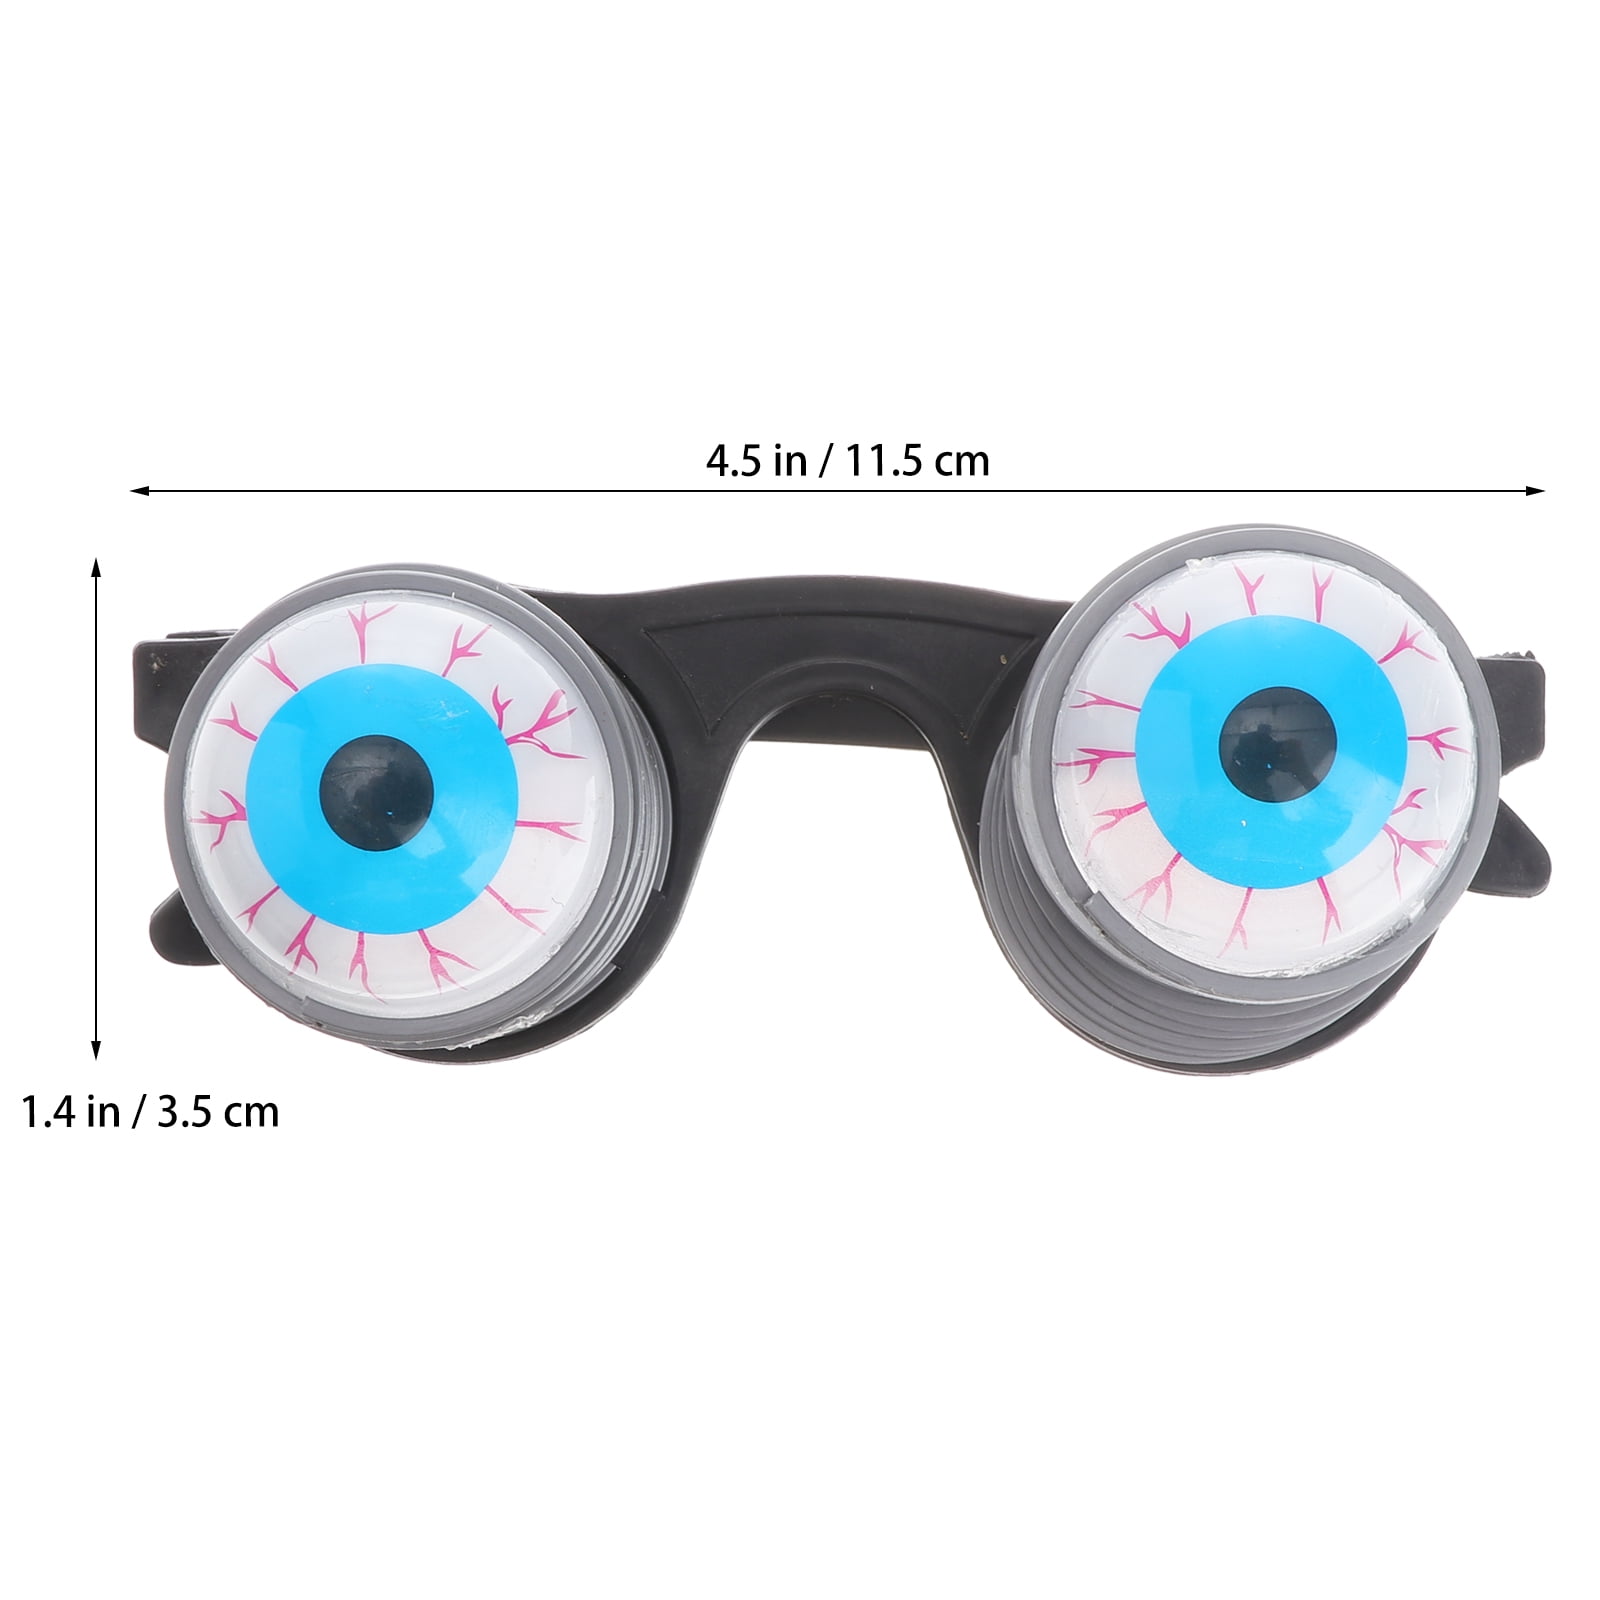 Droopy Eye Specs~Glasses~Spring~Springy~Pop out Eyes~Novelty~Joke Shop~Toy~Game 